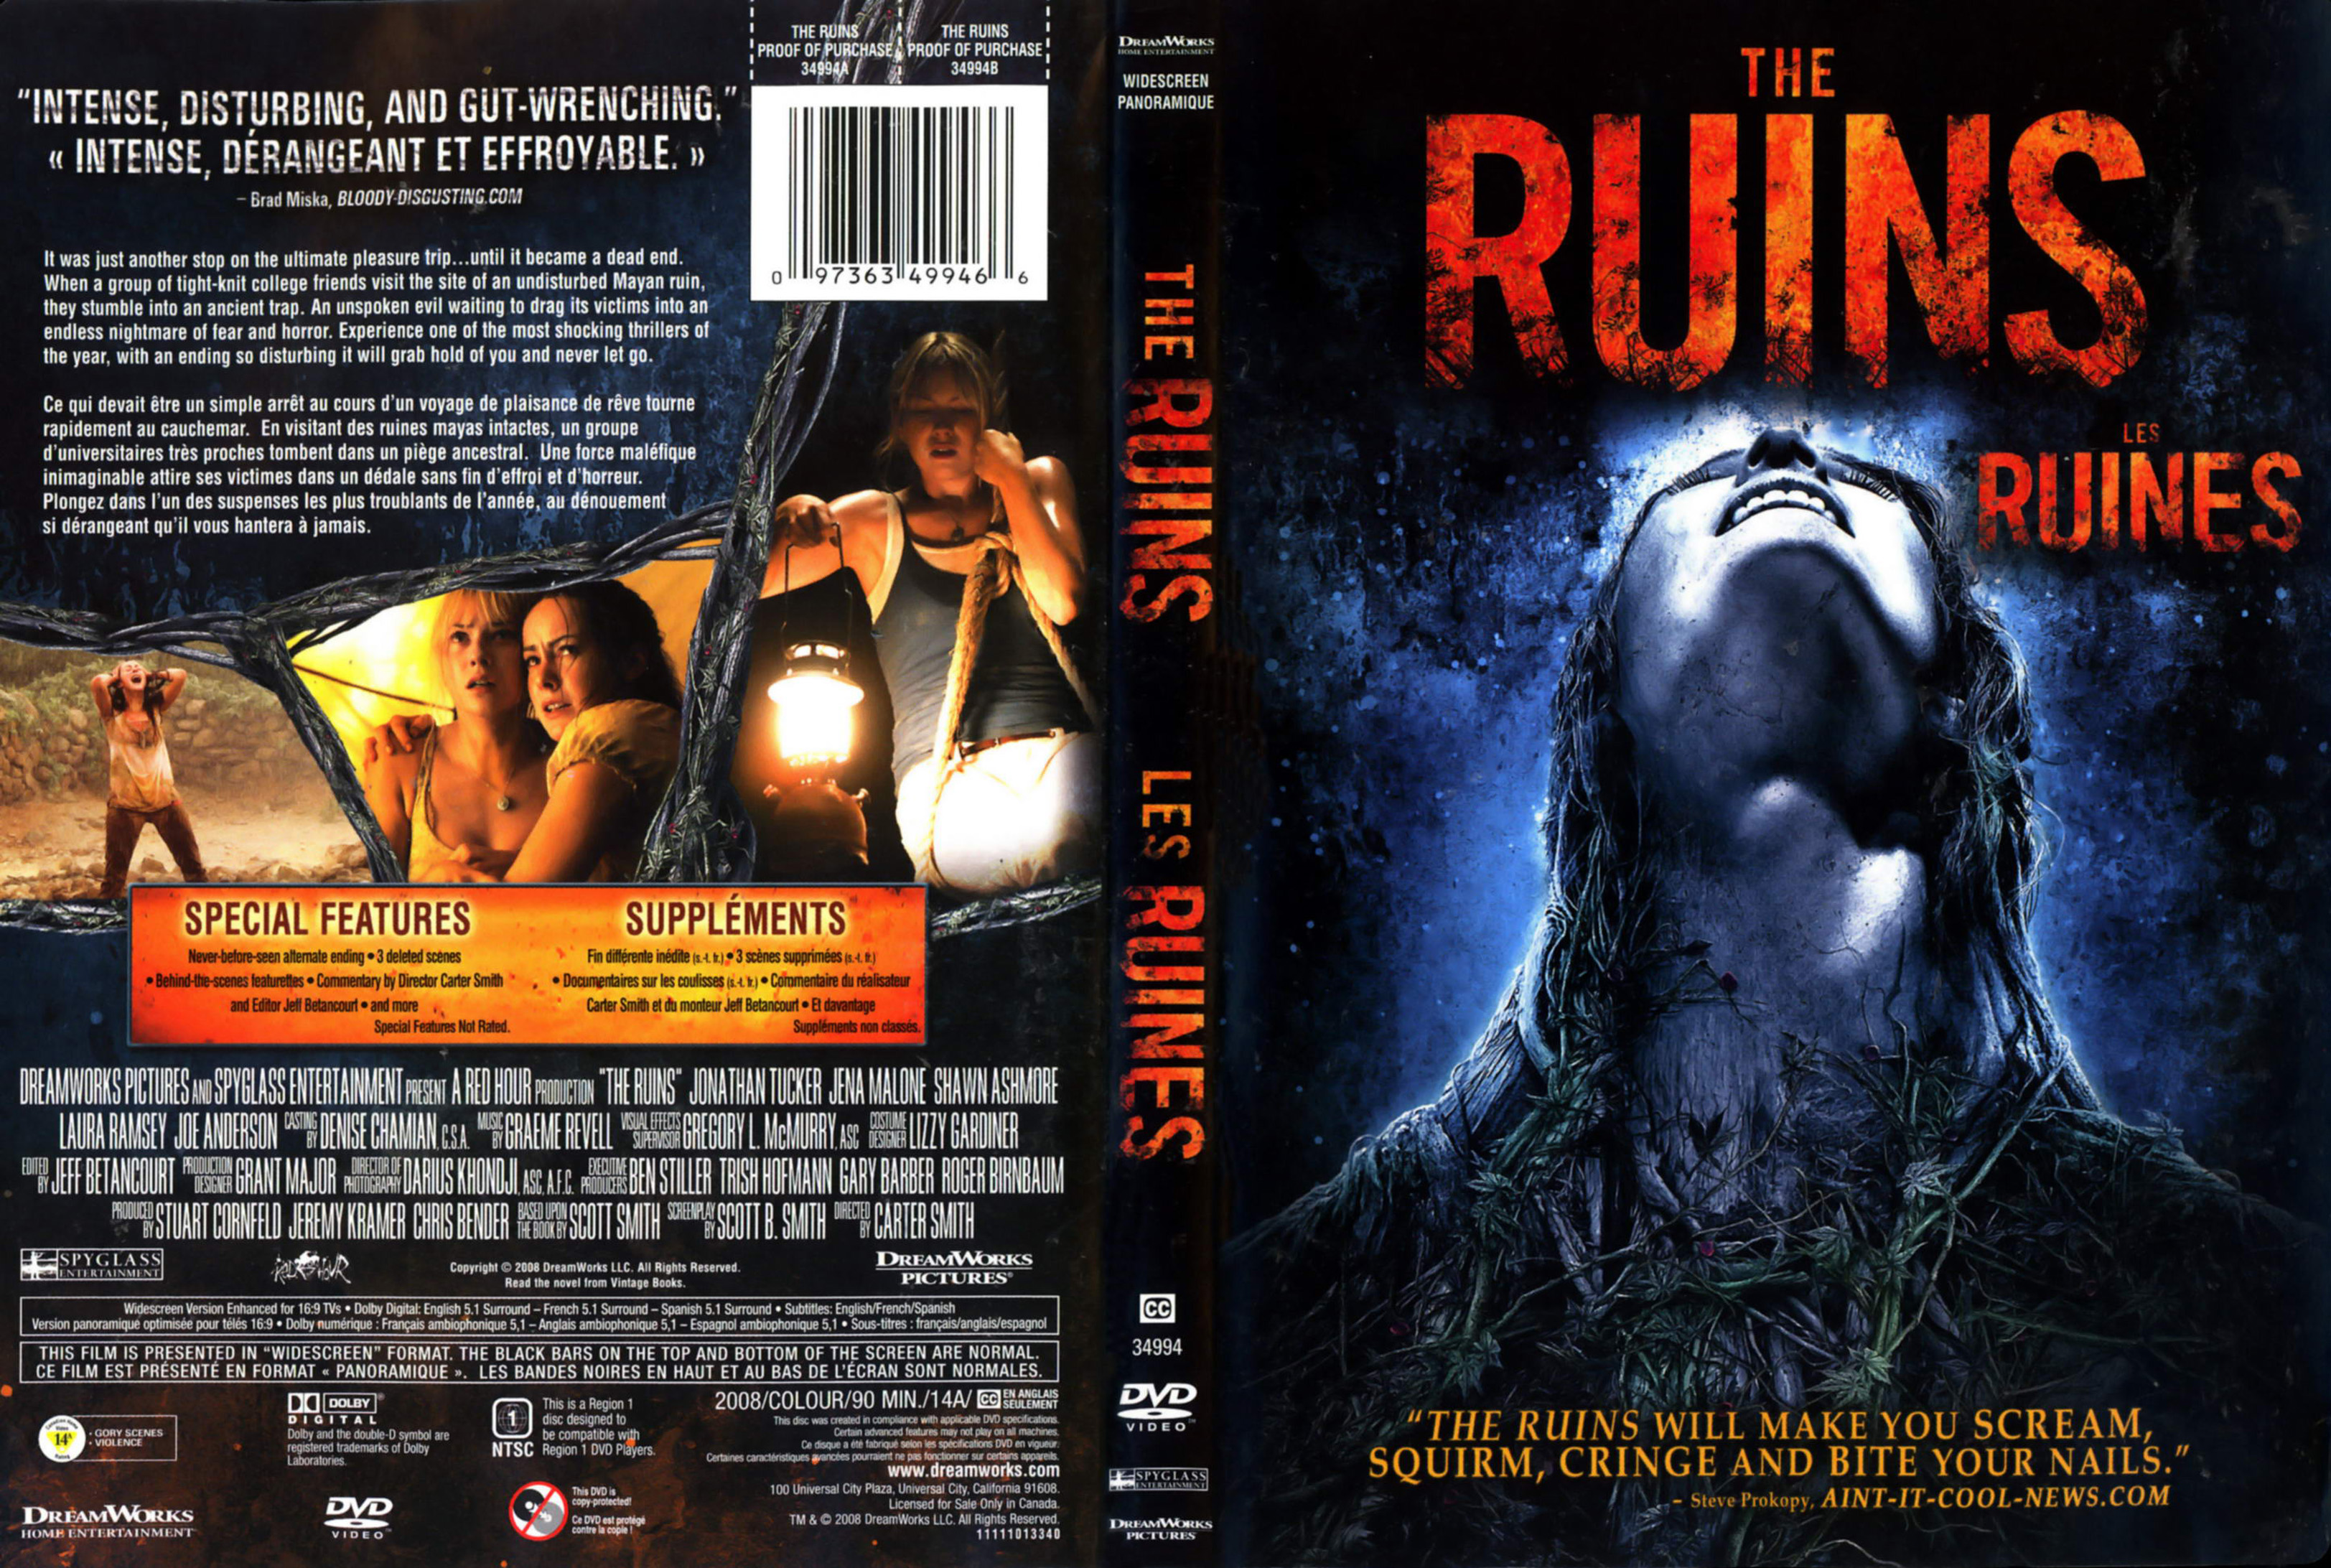 Jaquette DVD The ruins - Les ruines Zone 1